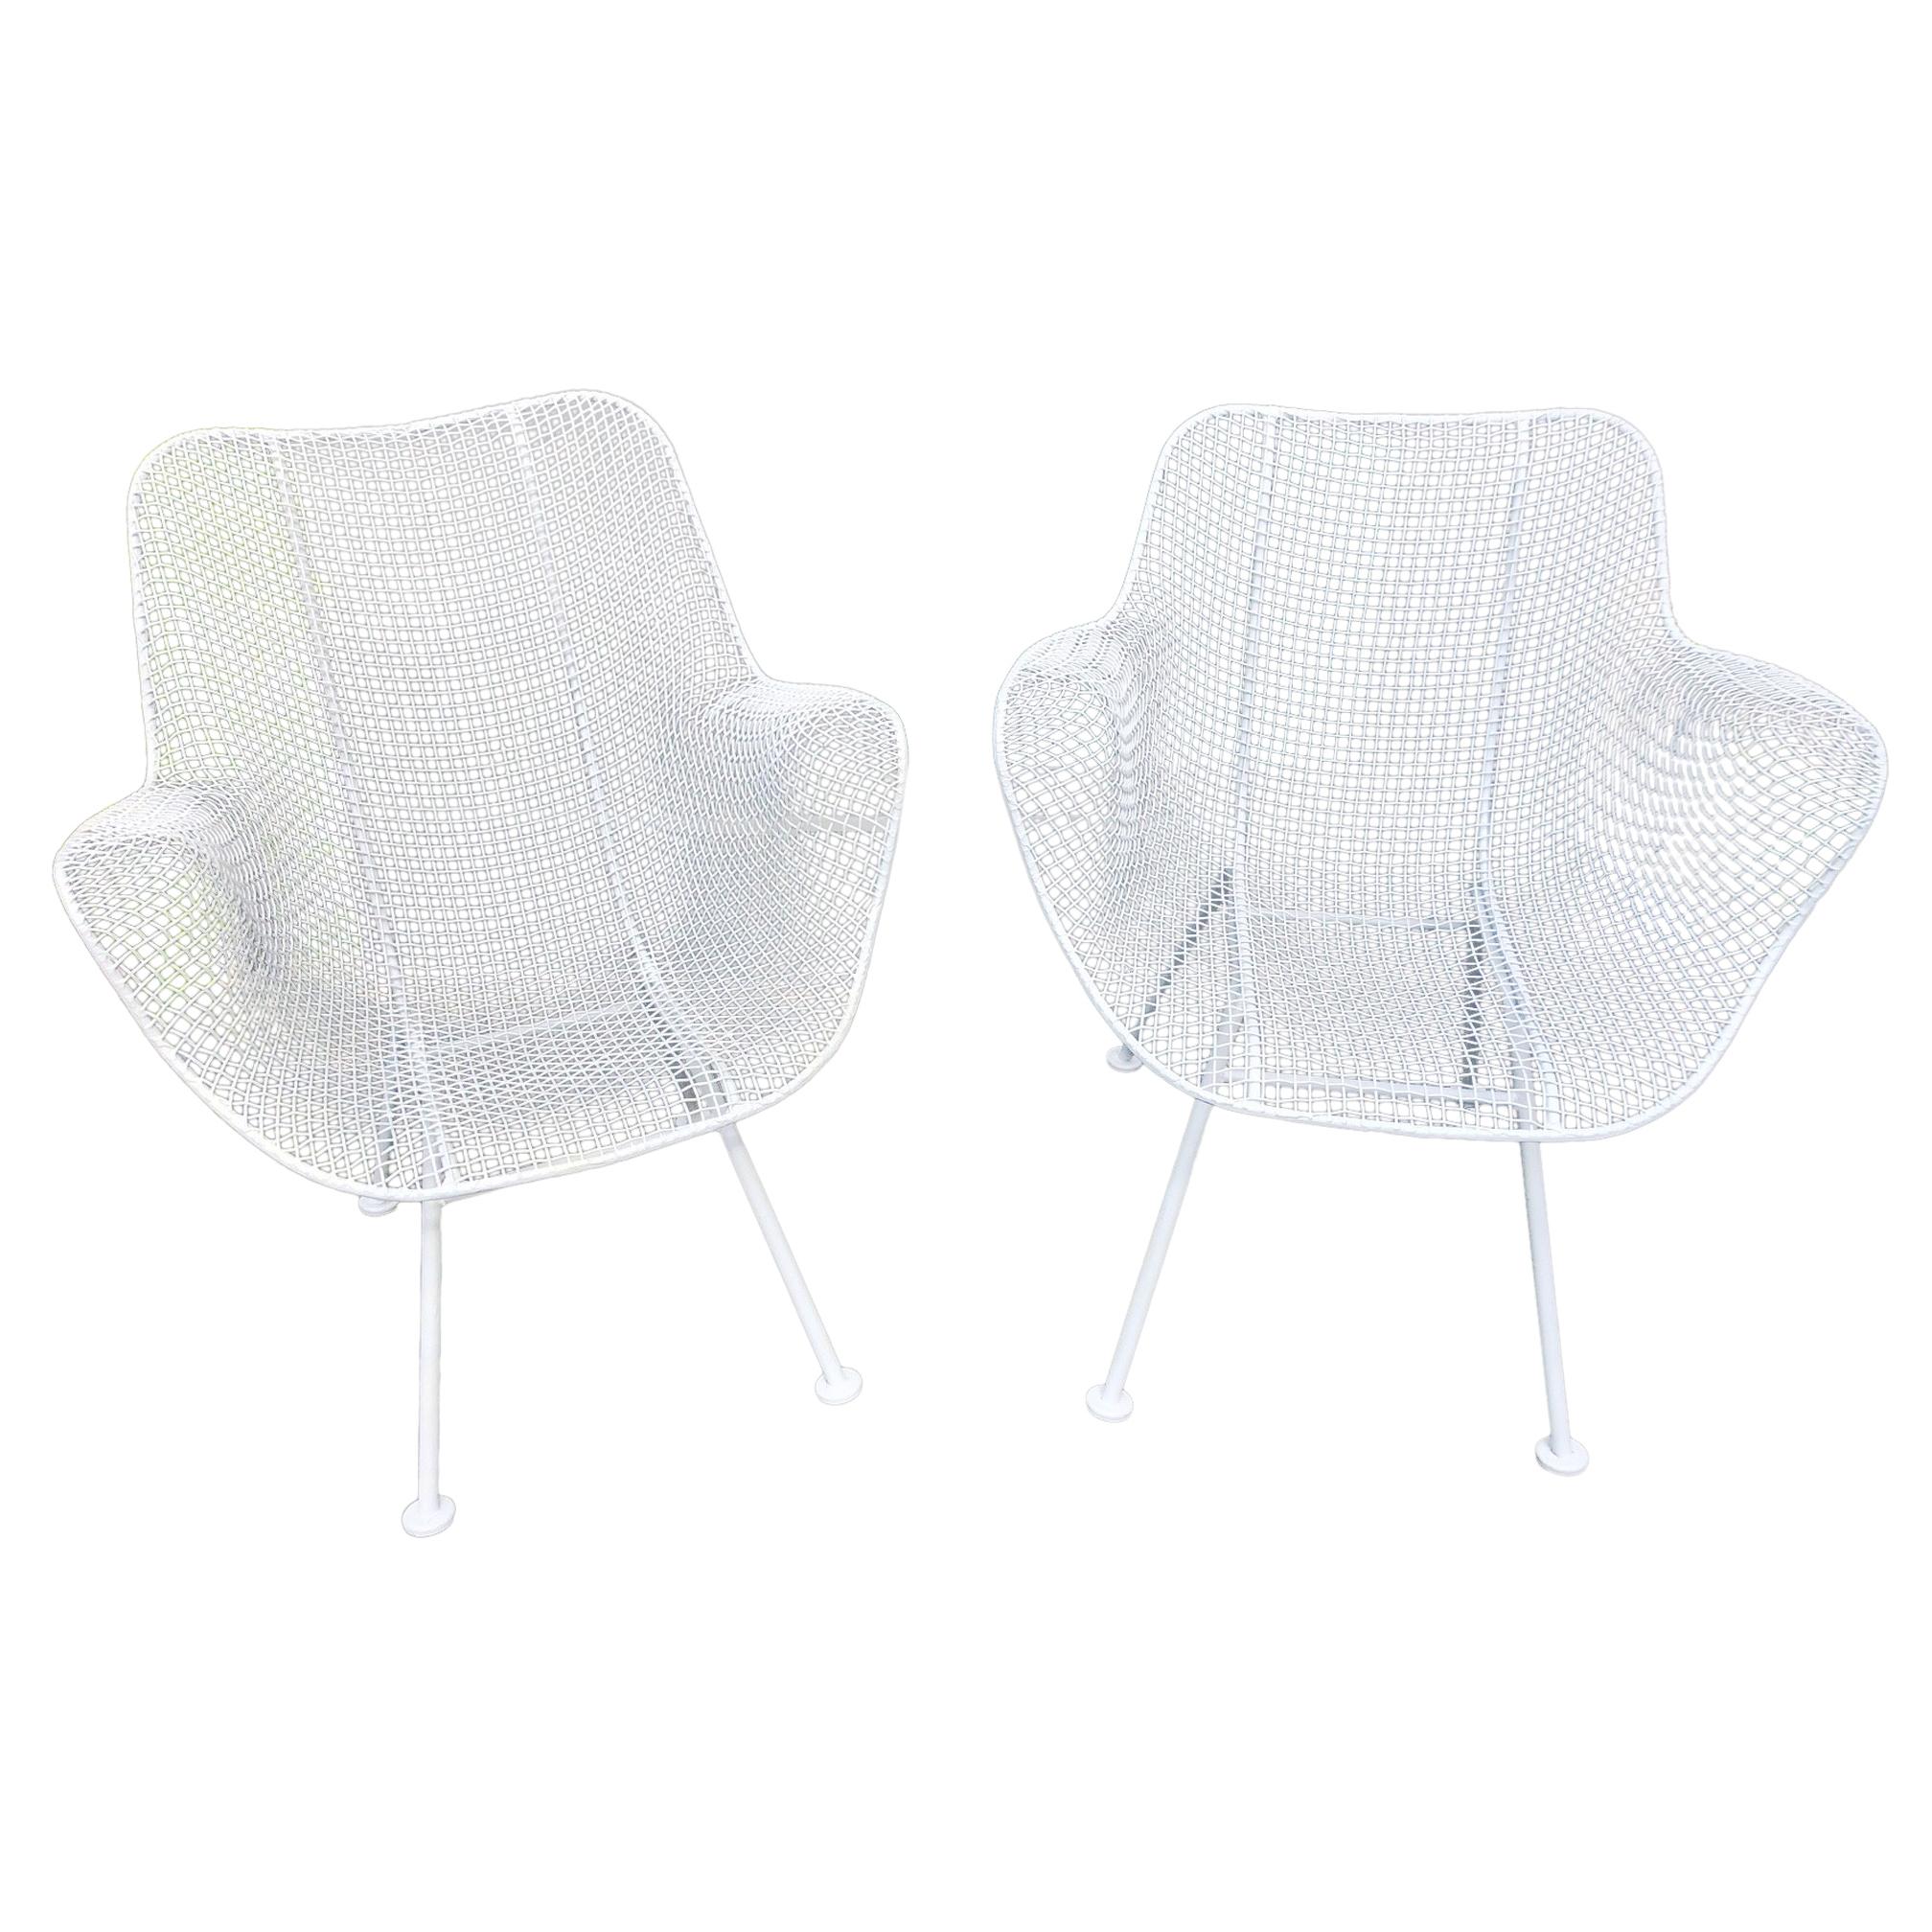 Pair of White Patio Chairs by Russell Woodard